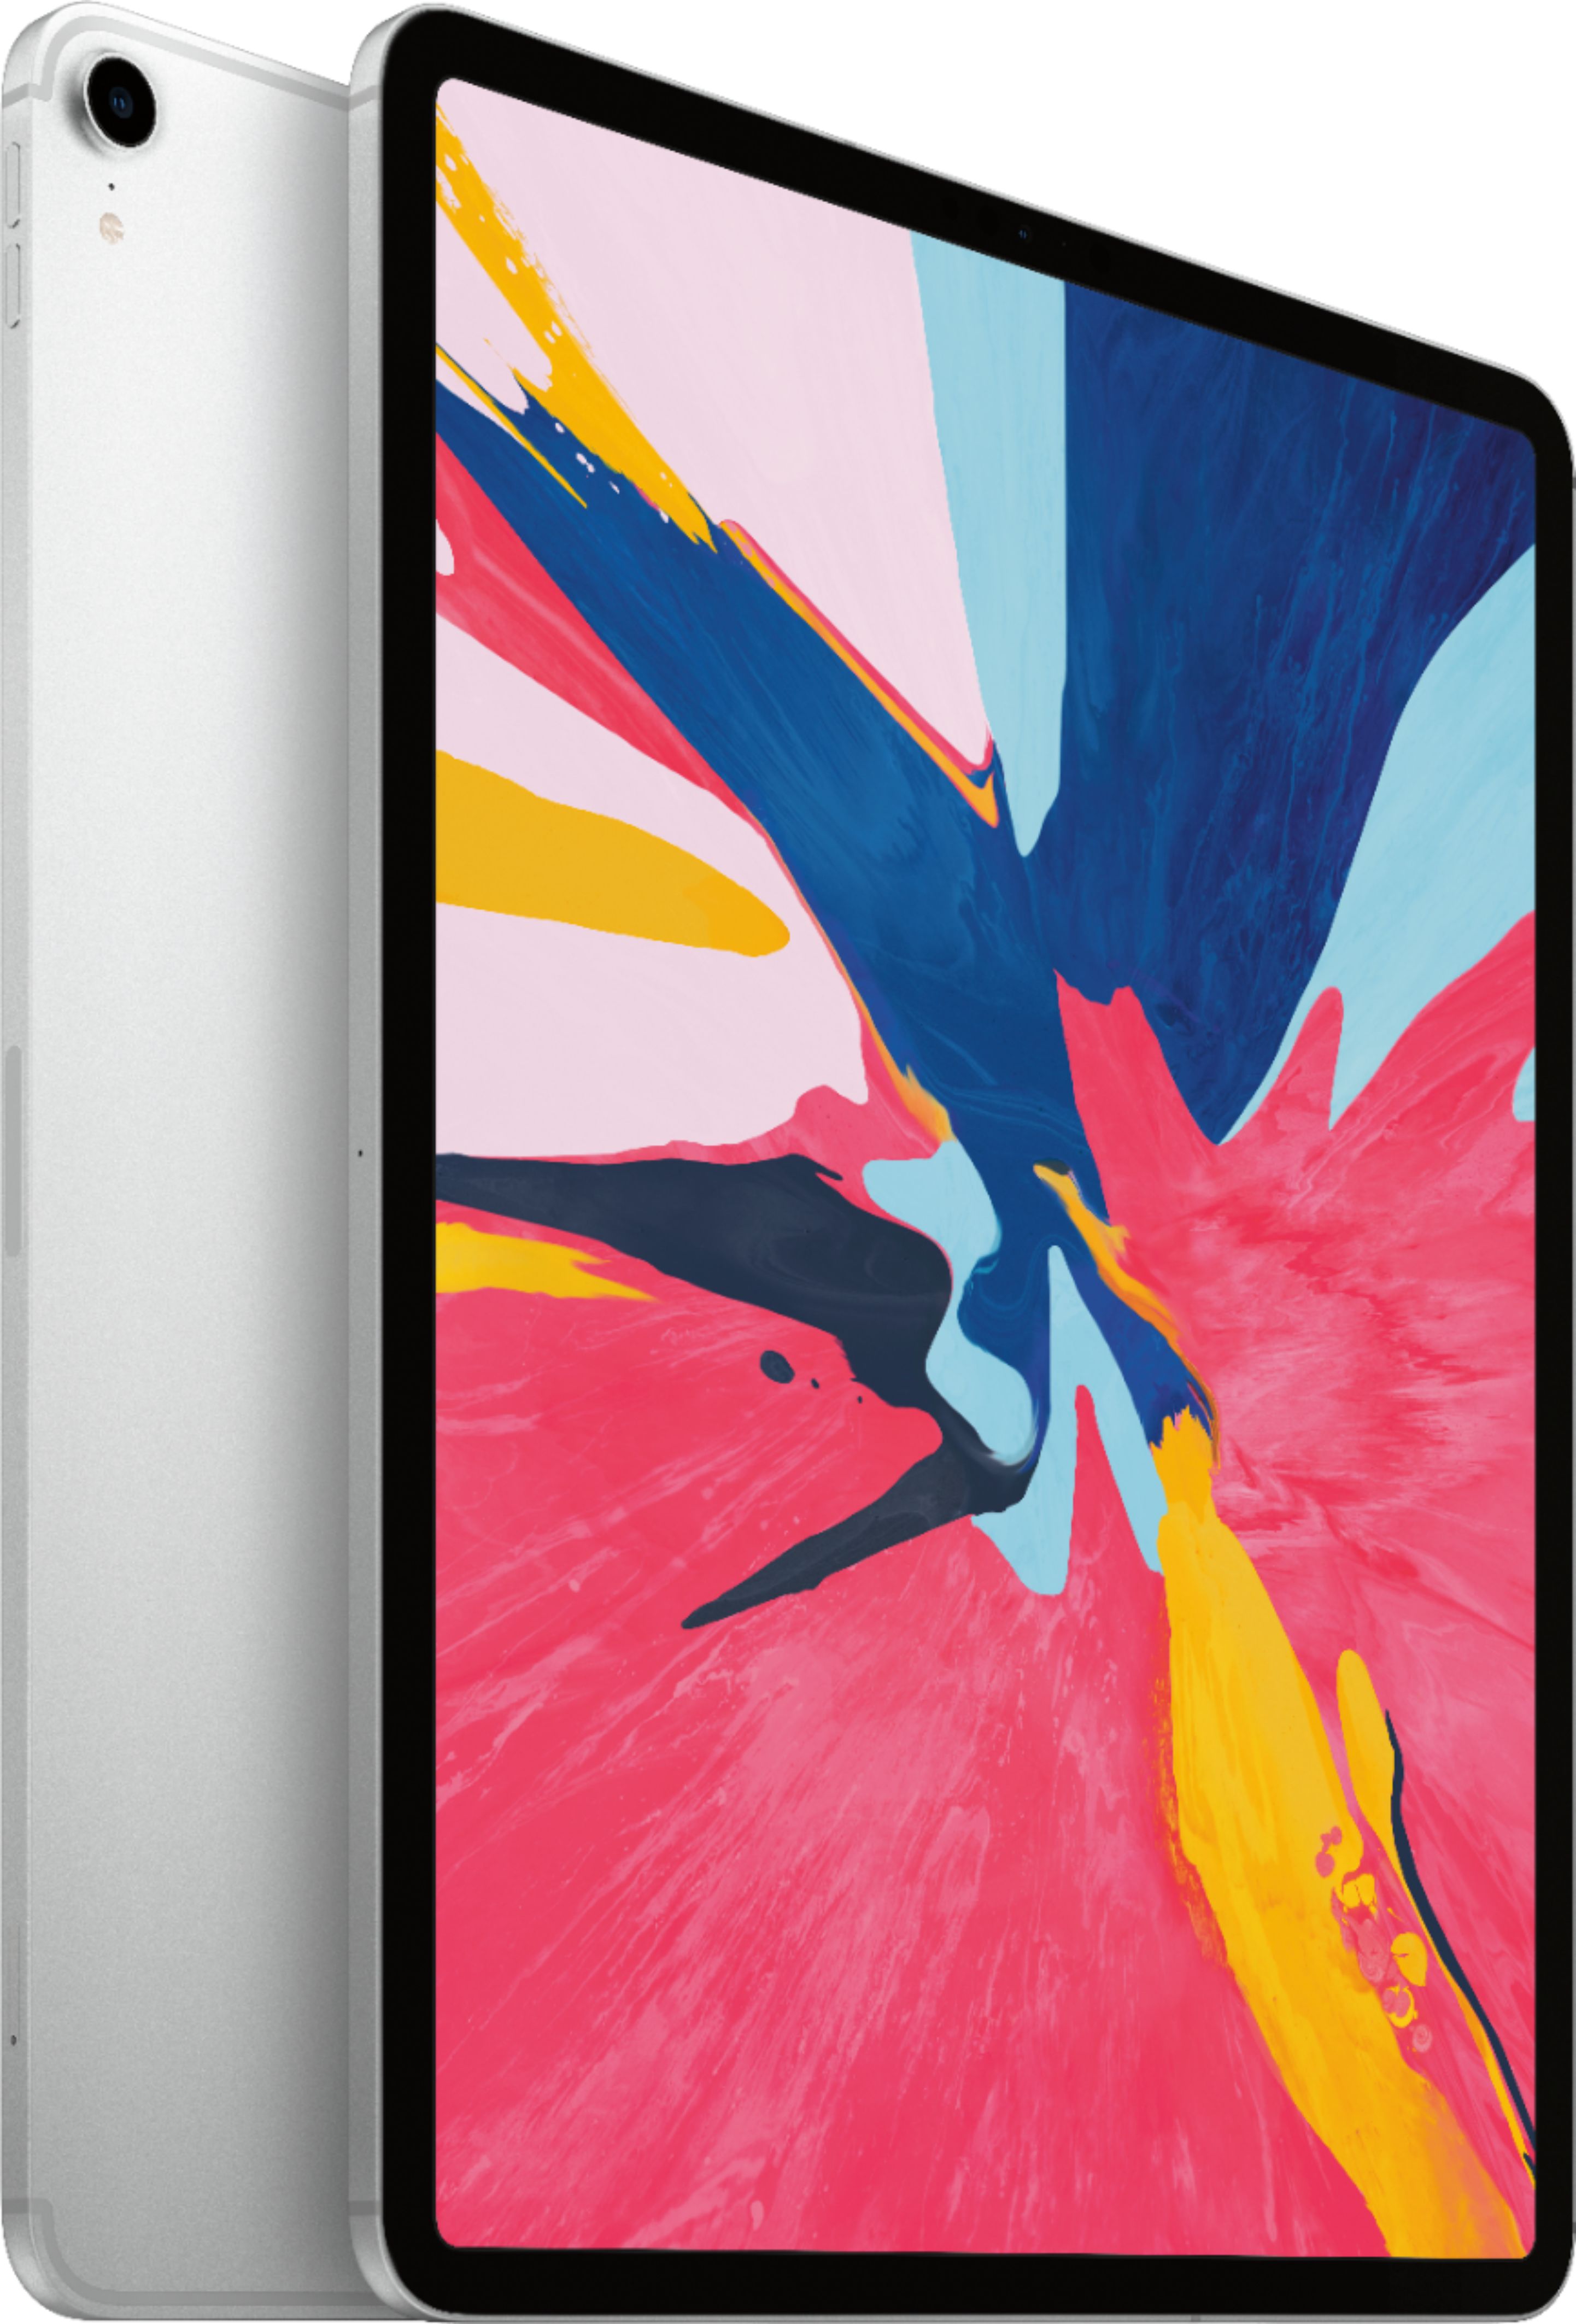 Angle View: Apple - 12.9-Inch iPad Pro (4th Generation) with Wi-Fi + Cellular - 1TB (Unlocked) - Space Gray